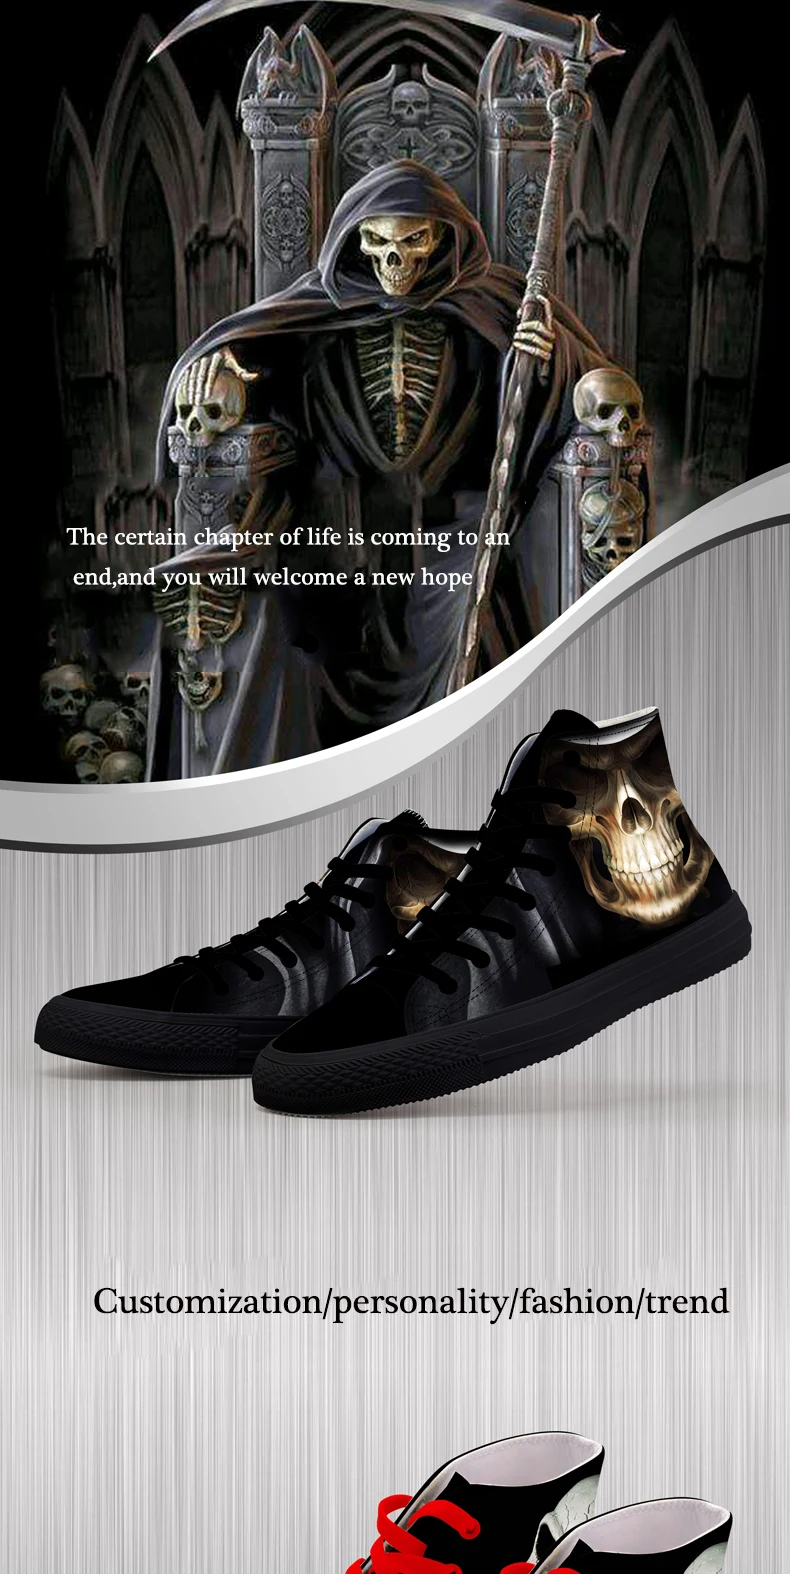 FIRST DANCE Casual Black Punk Skull High Top Shoes Men Classic High Canvas Shoes Fashion 3D Street Nice Printed Casual Shoes Men 3